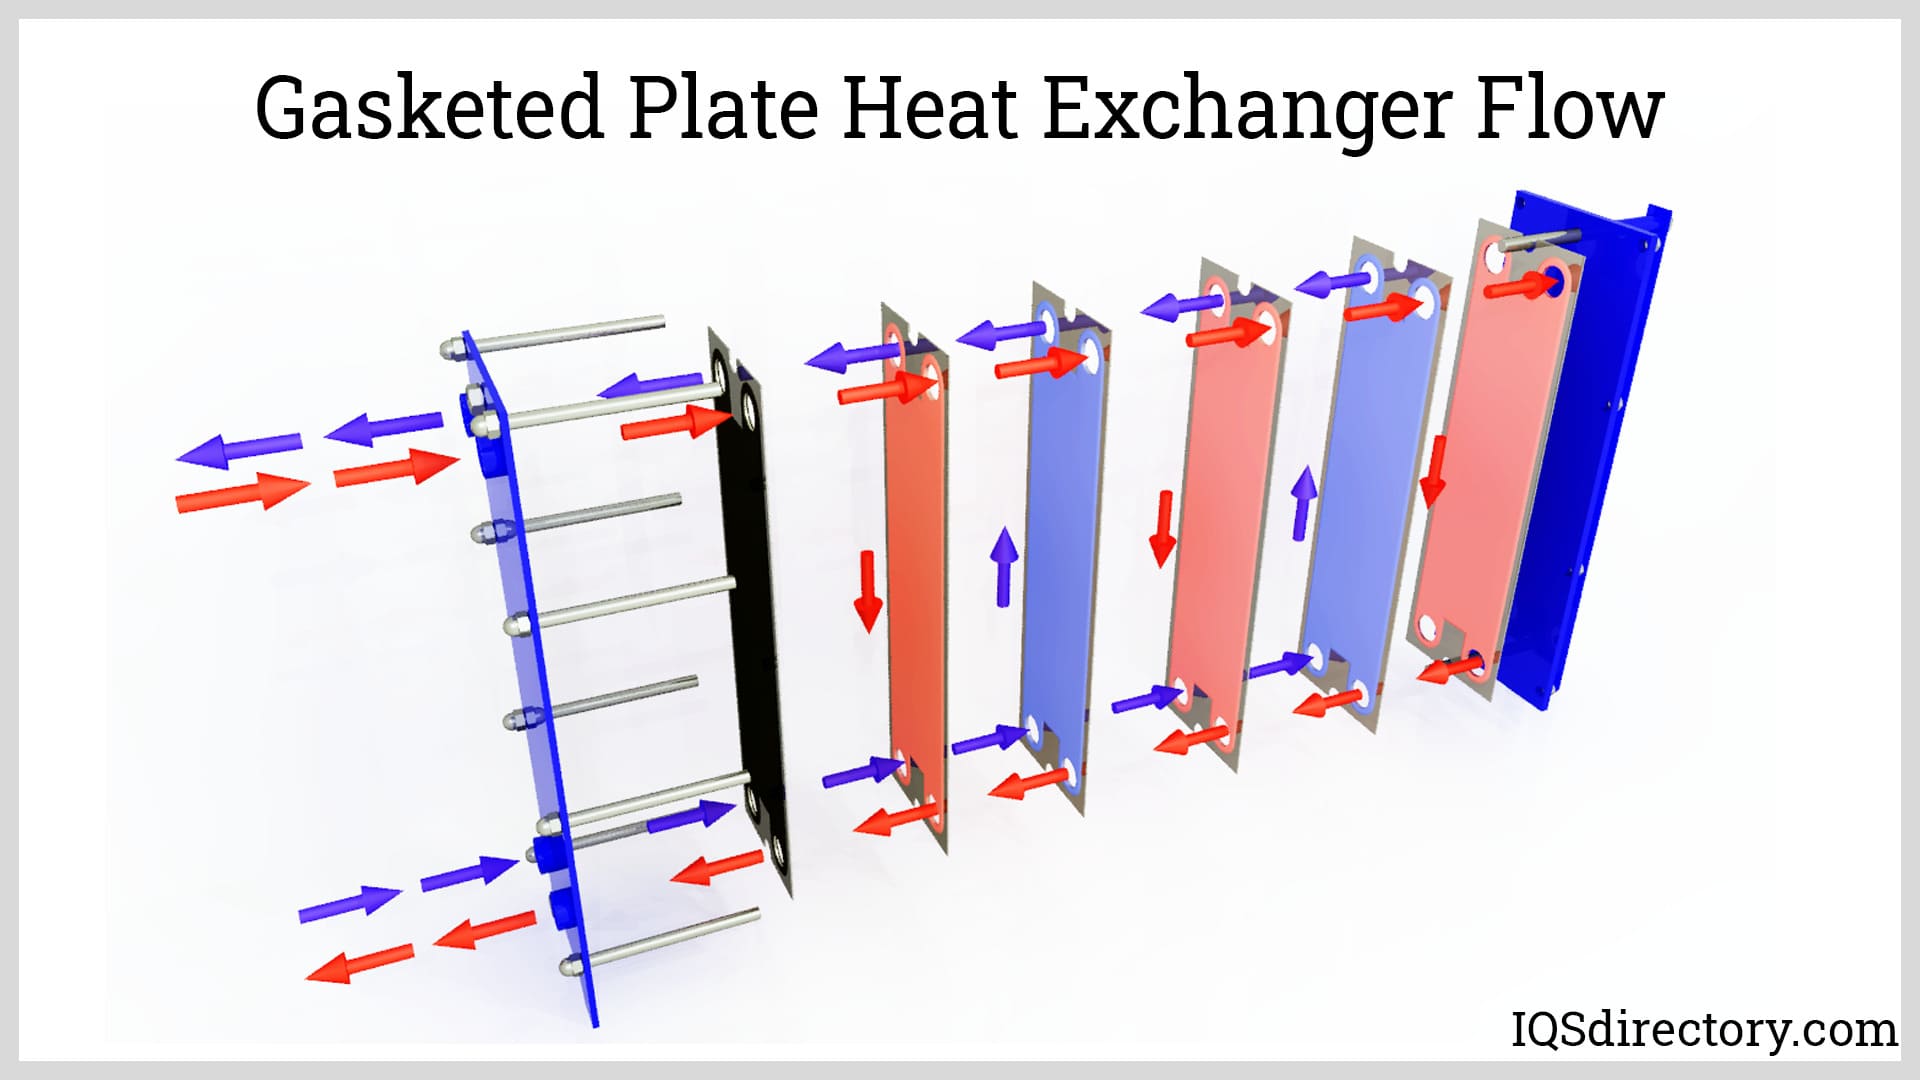 Gasketed Plate Heat Exchanger Flow